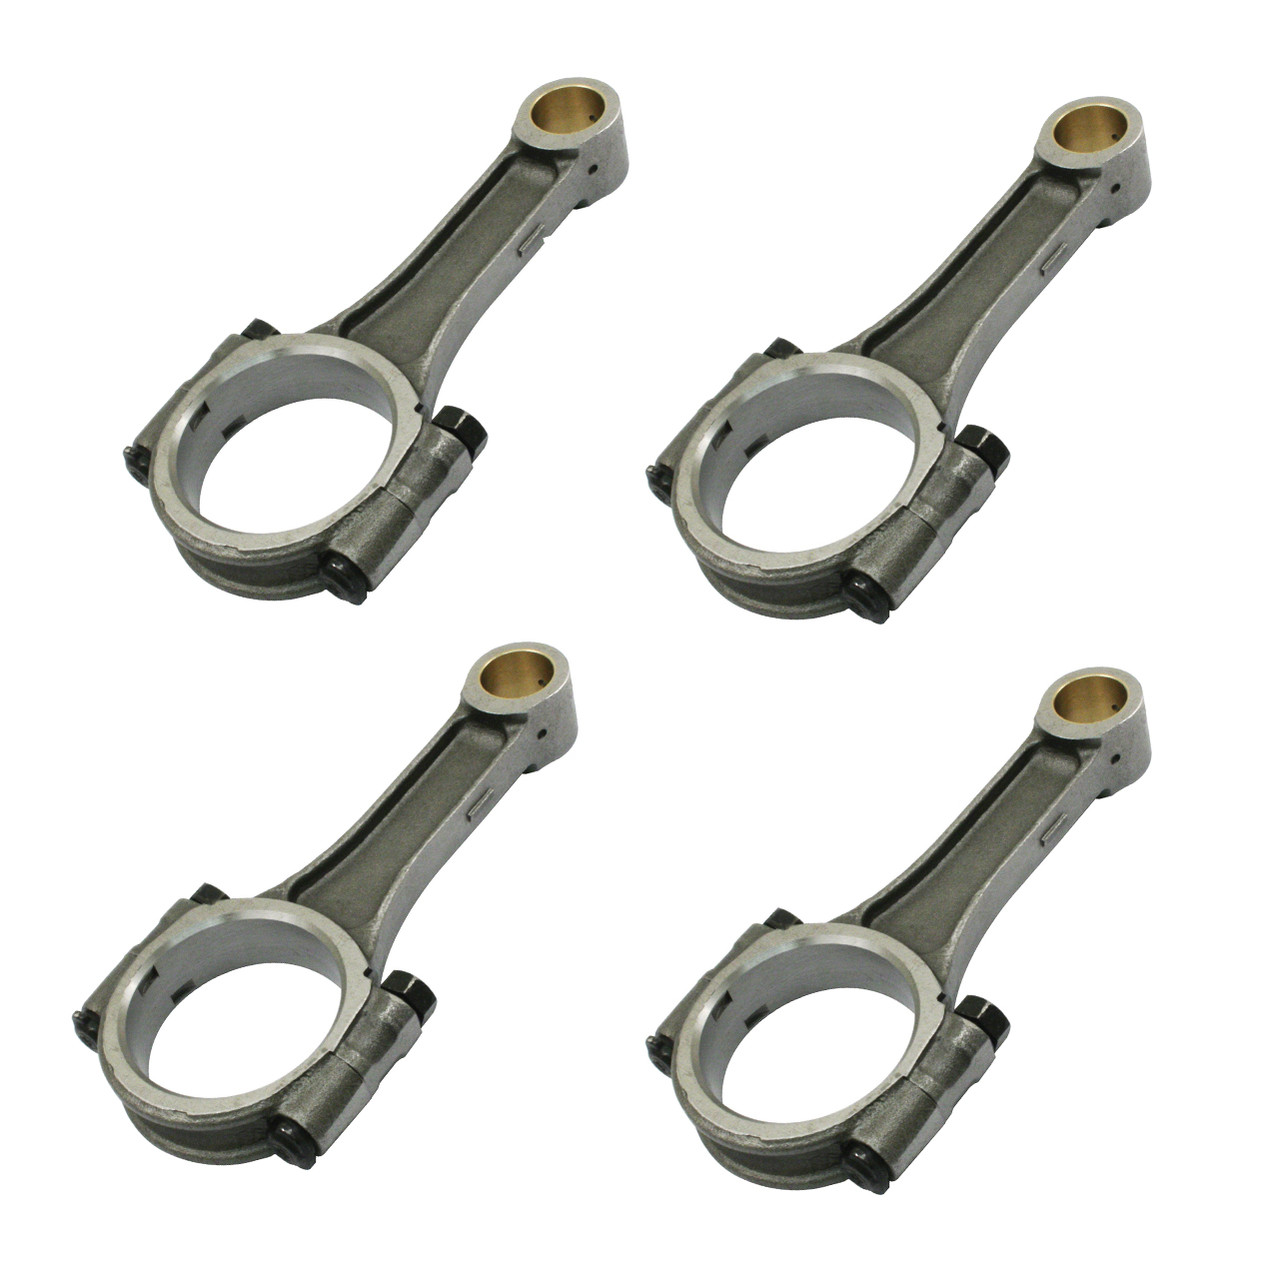 VWC-311-105-401-BST - 311105401B - NEW STOCK REPLACEMENT CONNECTING ROD SET  - 1300CC-1600CC ENGINES - TORQUE ROD BOLTS TO 30FT LBS - Ref.# 98-0153-B -  BEETLE - GHIA - BUS - TYPE-3 - VW THING 69-79 - SOLD IN SETS OF 4